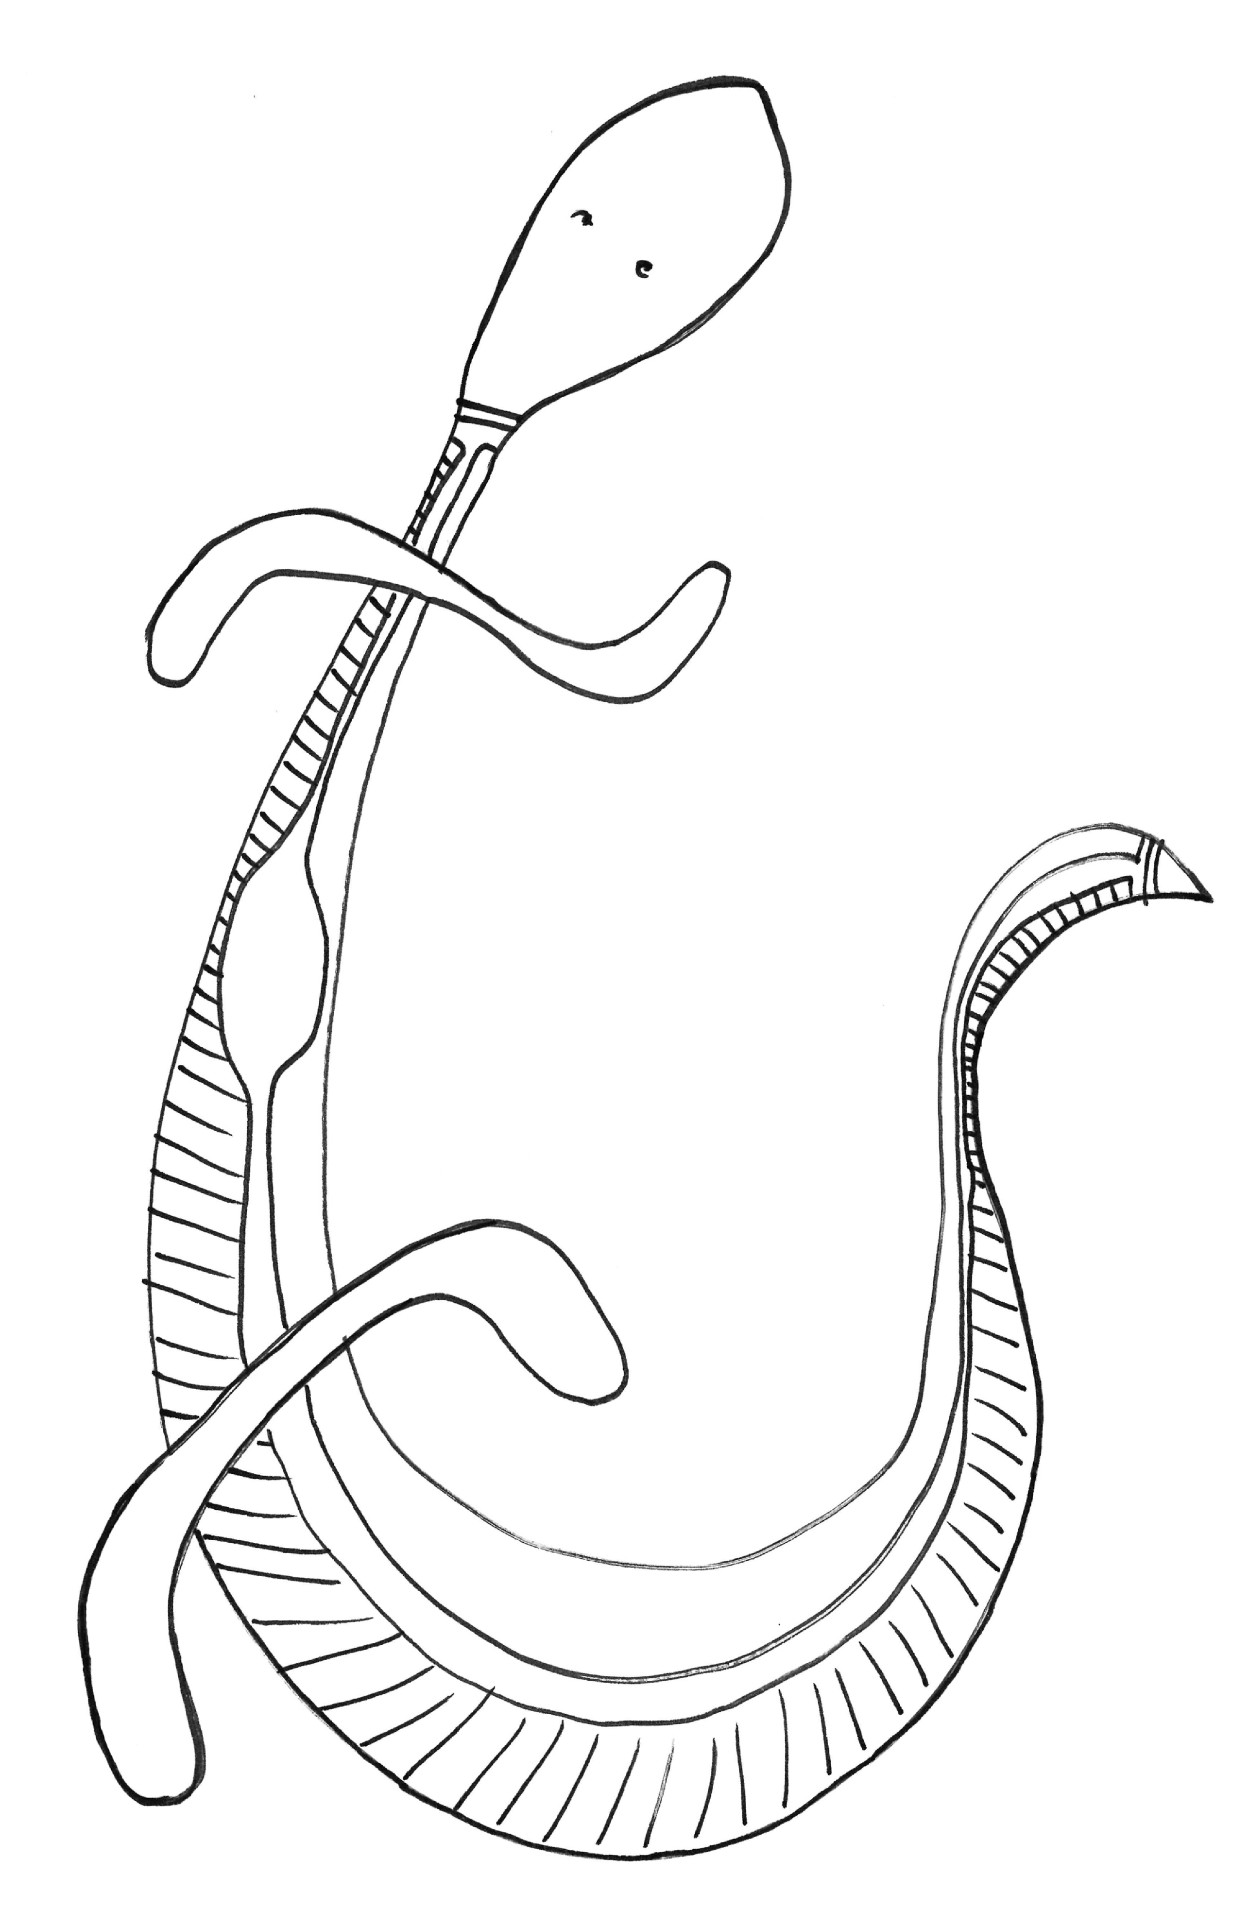 line drawing illustration of a lizard in motion viewed from above